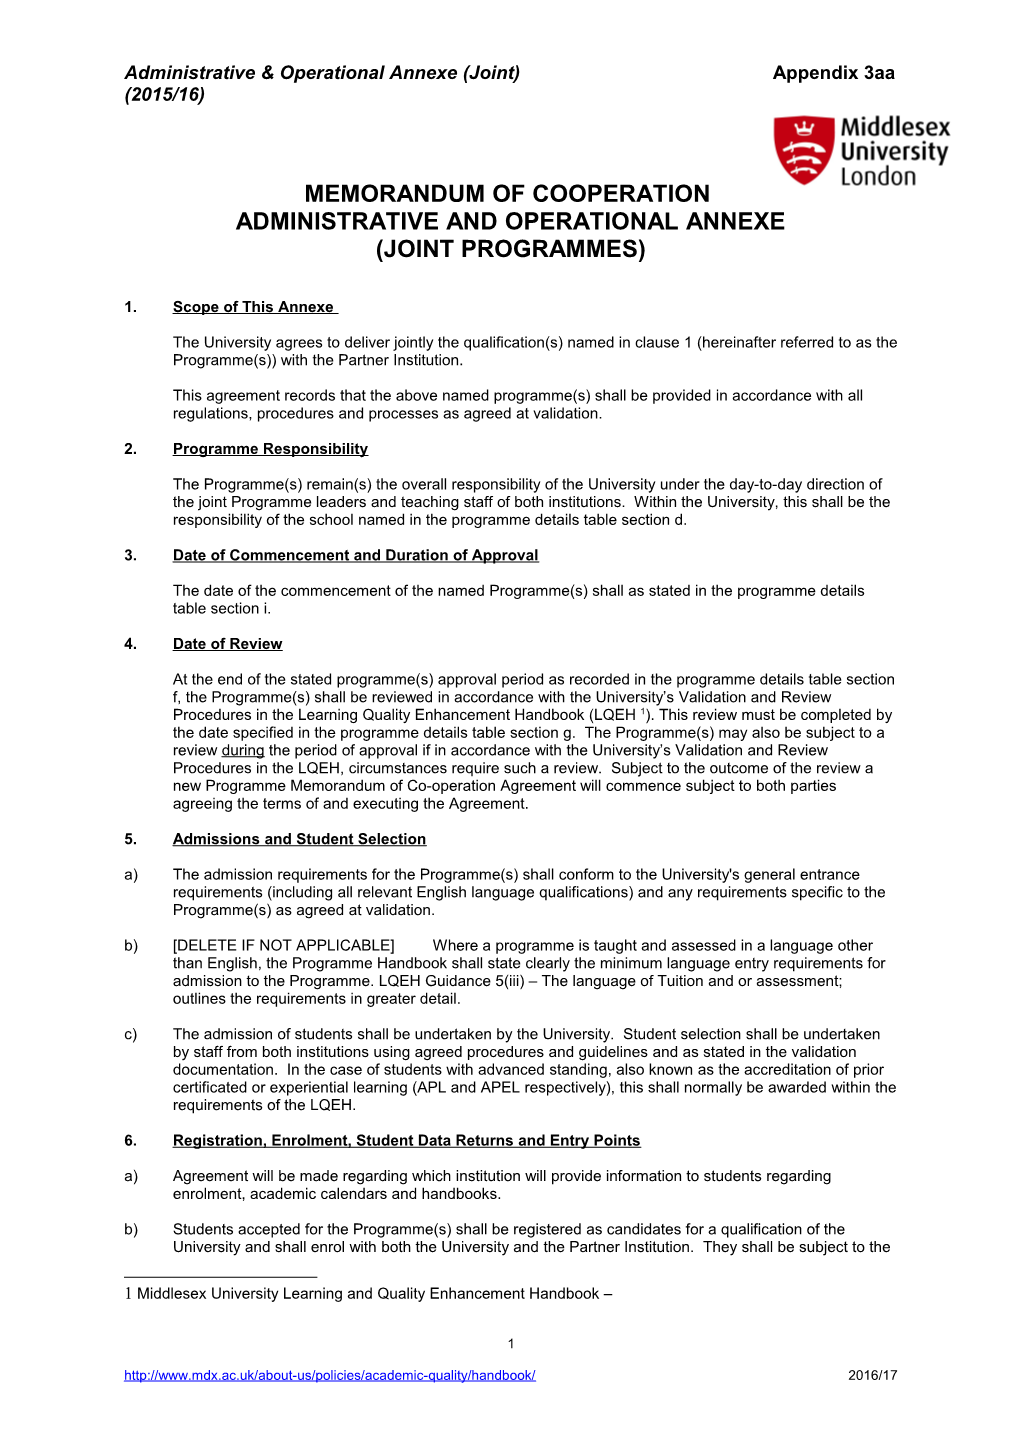 Administrative & Operational Annexe (Joint) Appendix 3Aa